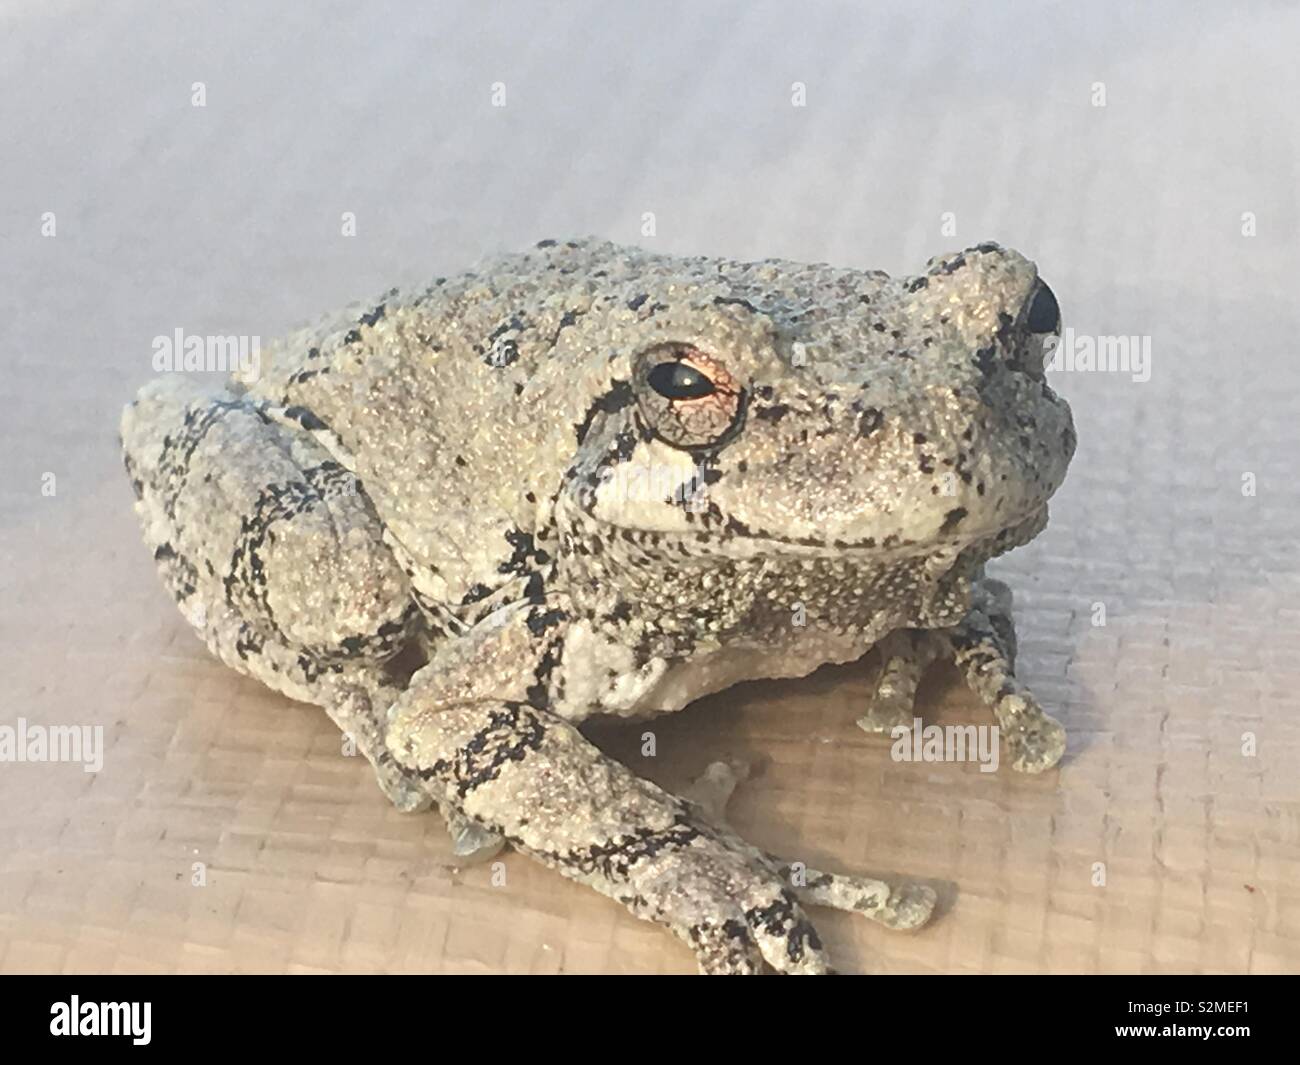 A tree frog resting on a trampoline Stock Photo - Alamy